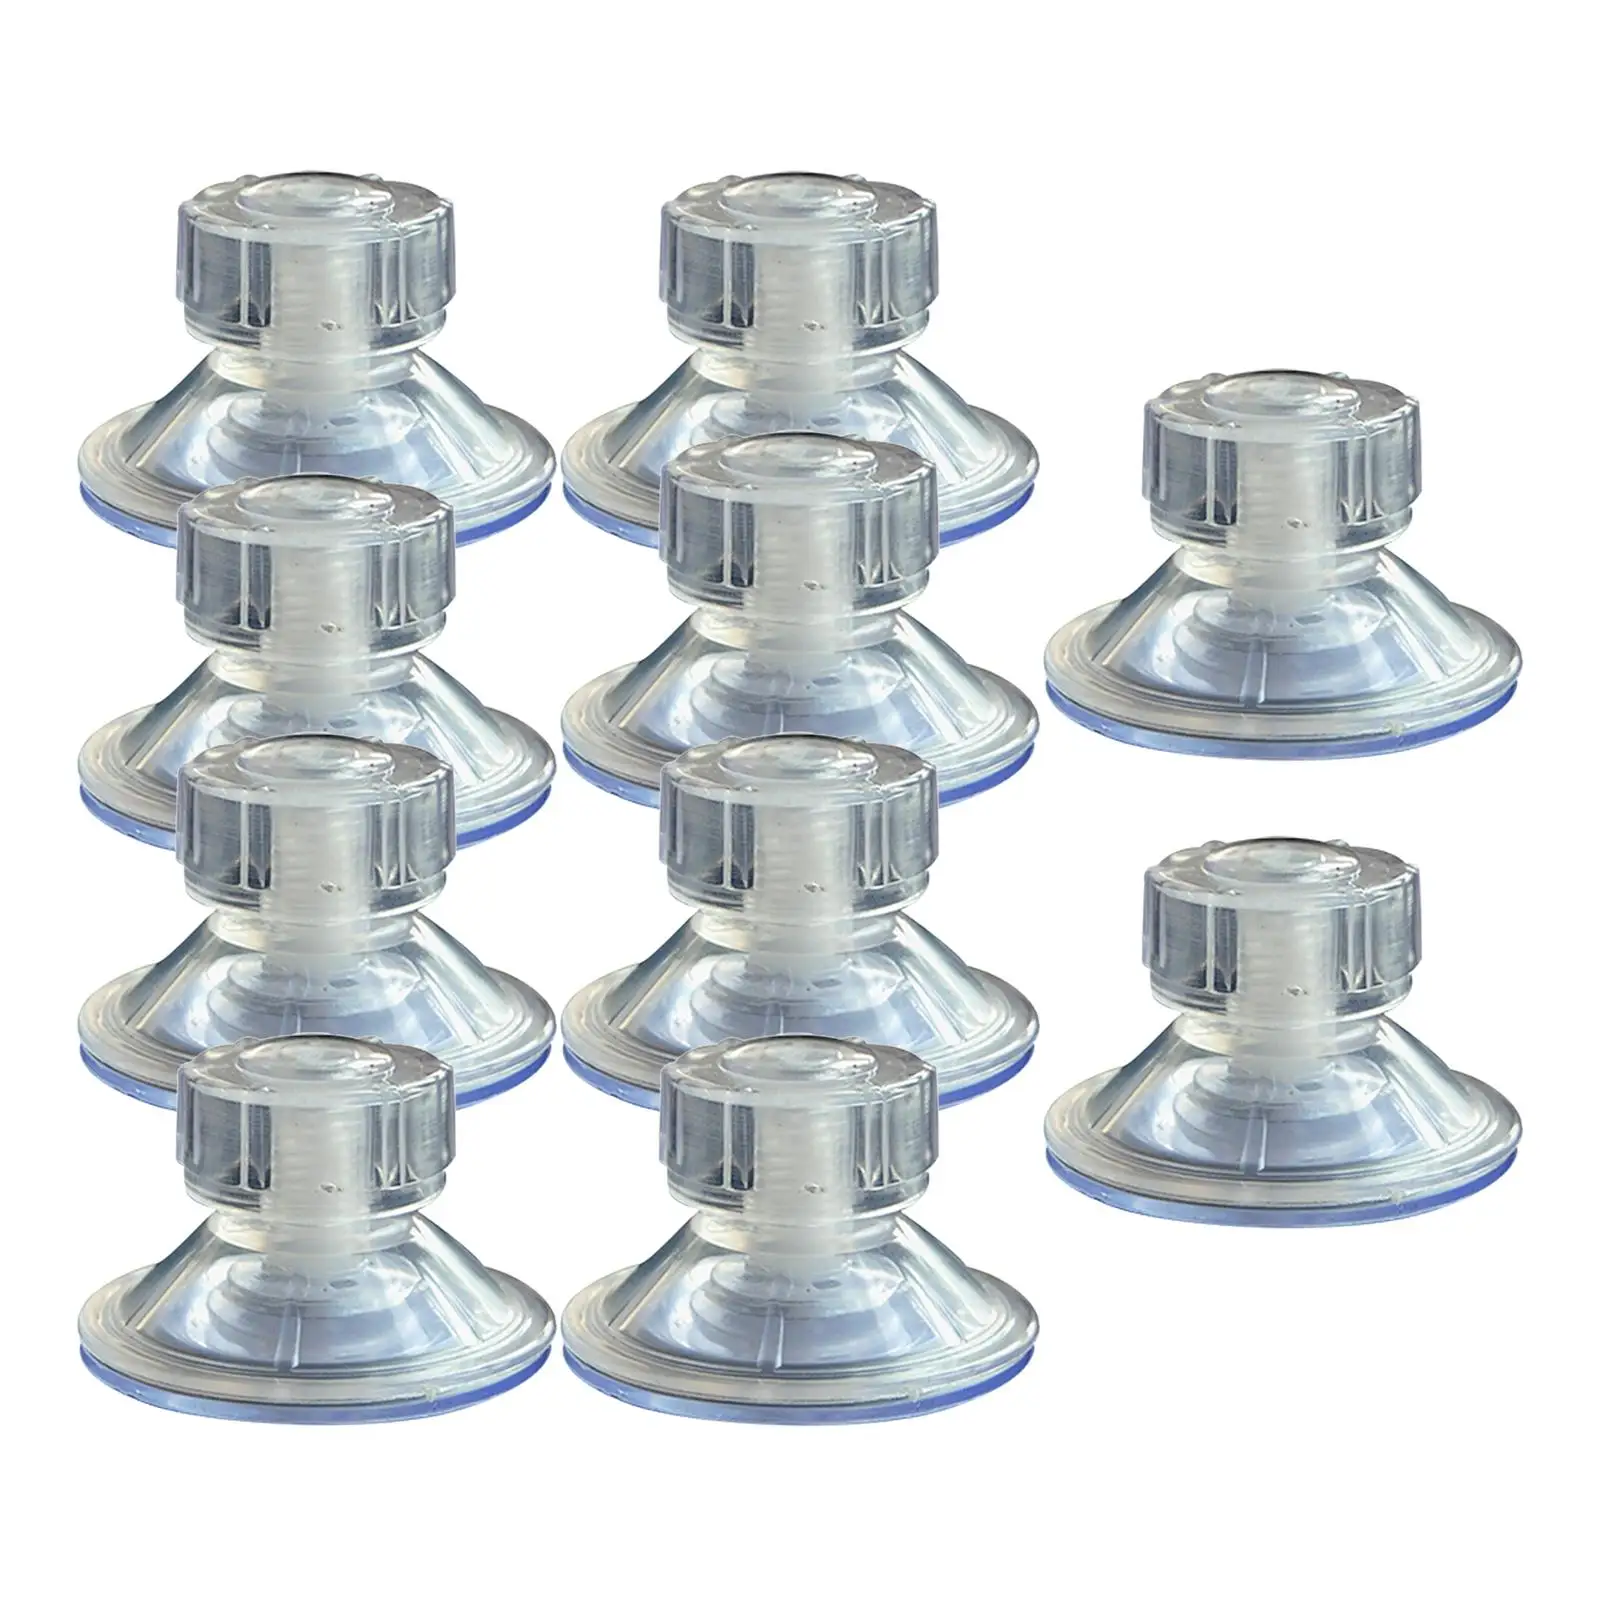 10 Pieces Car Awning Suction Cup Anchor Fixing Pads Limpets for